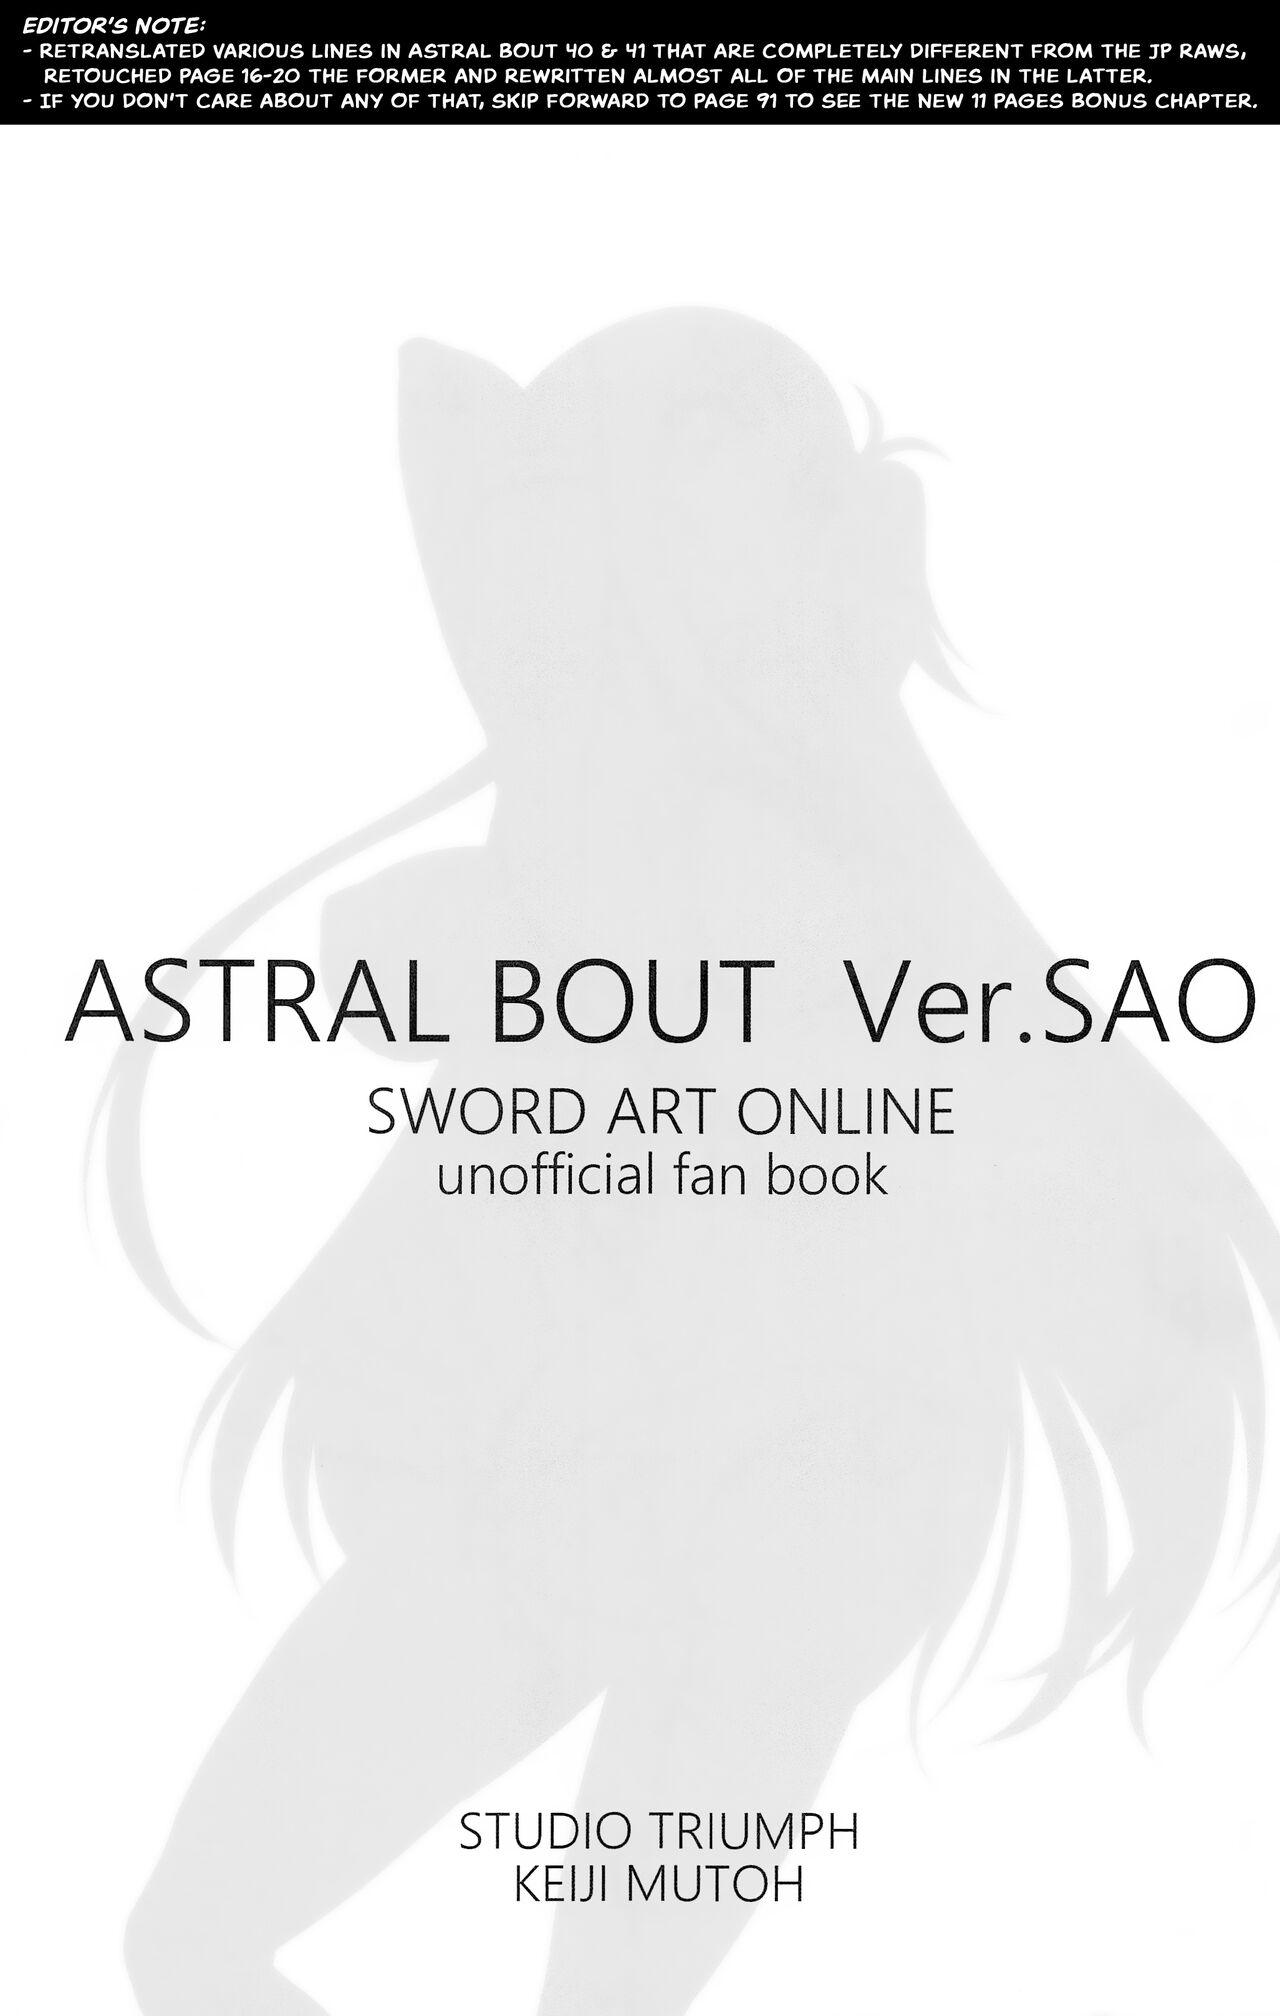 Lady Astral Bout Ver. SAO - Sword art online Feet - Picture 2